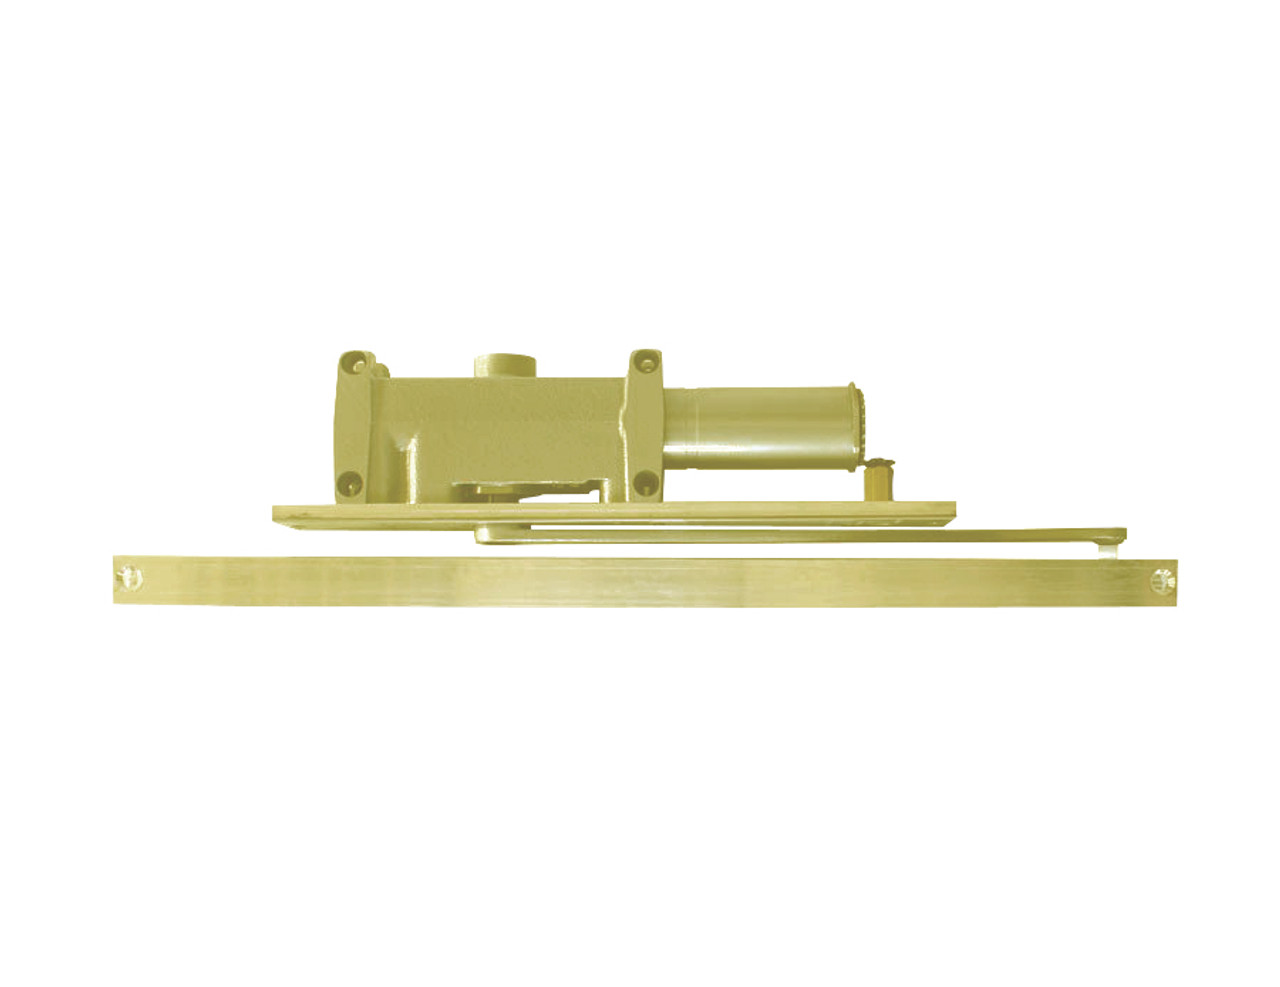 2011-H-RH-US4 LCN Door Closer with Hold Open Arm in Satin Brass Finish